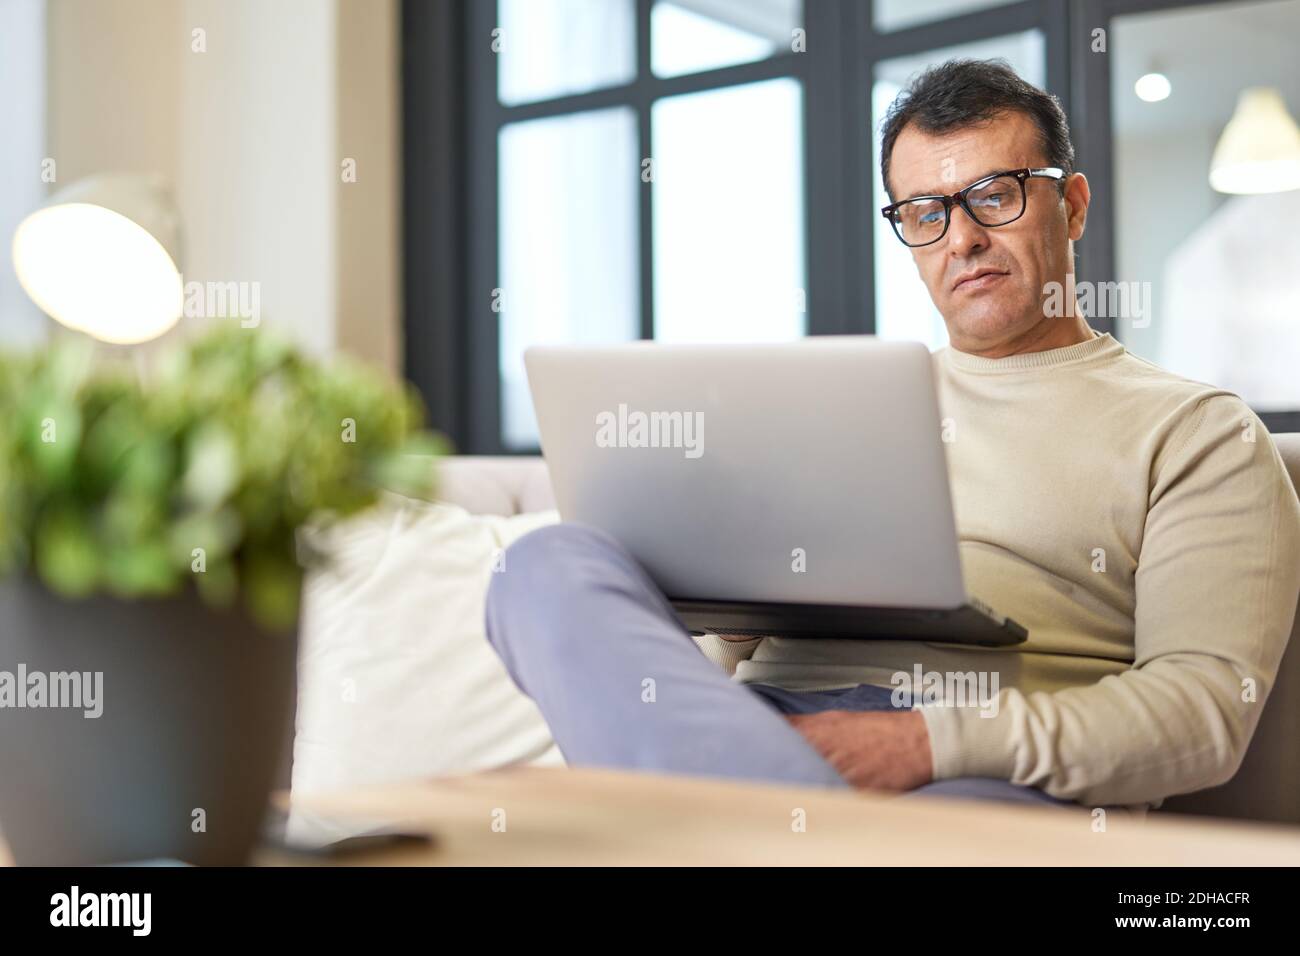 Portrait of latin middle aged business man with eyeglasses working at home on some project, sitting on a sofa with his laptop. Focus on the man. Telework, business concept Stock Photo